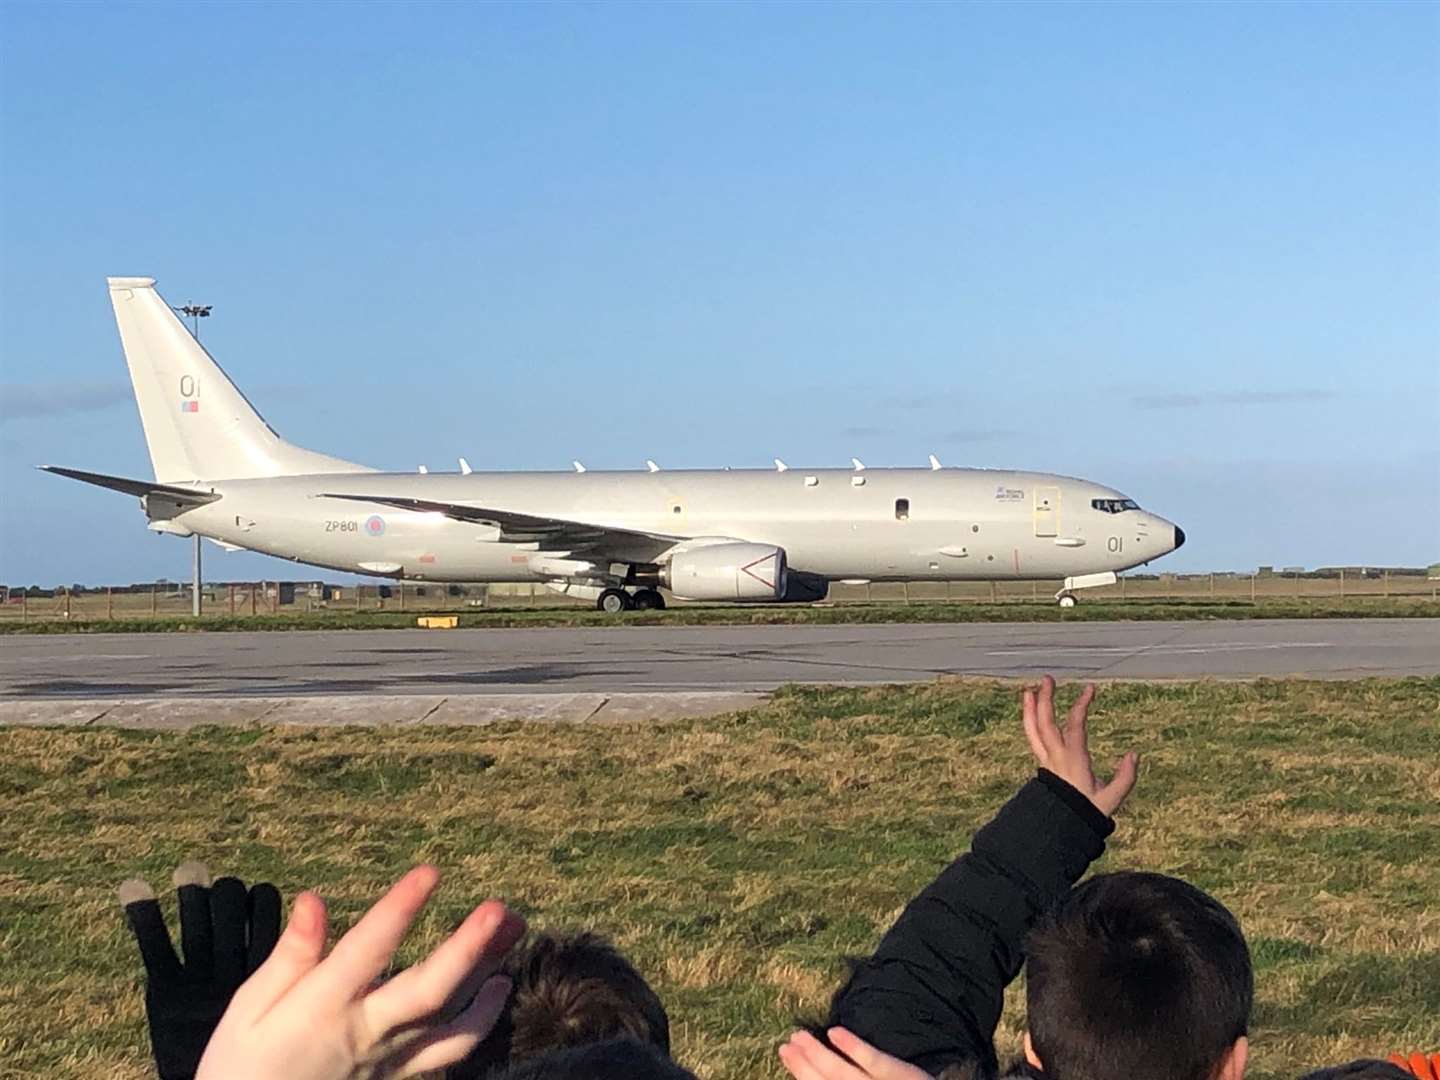 Kinloss pupils waving at the new aircraft as it lands on a runway near the village.